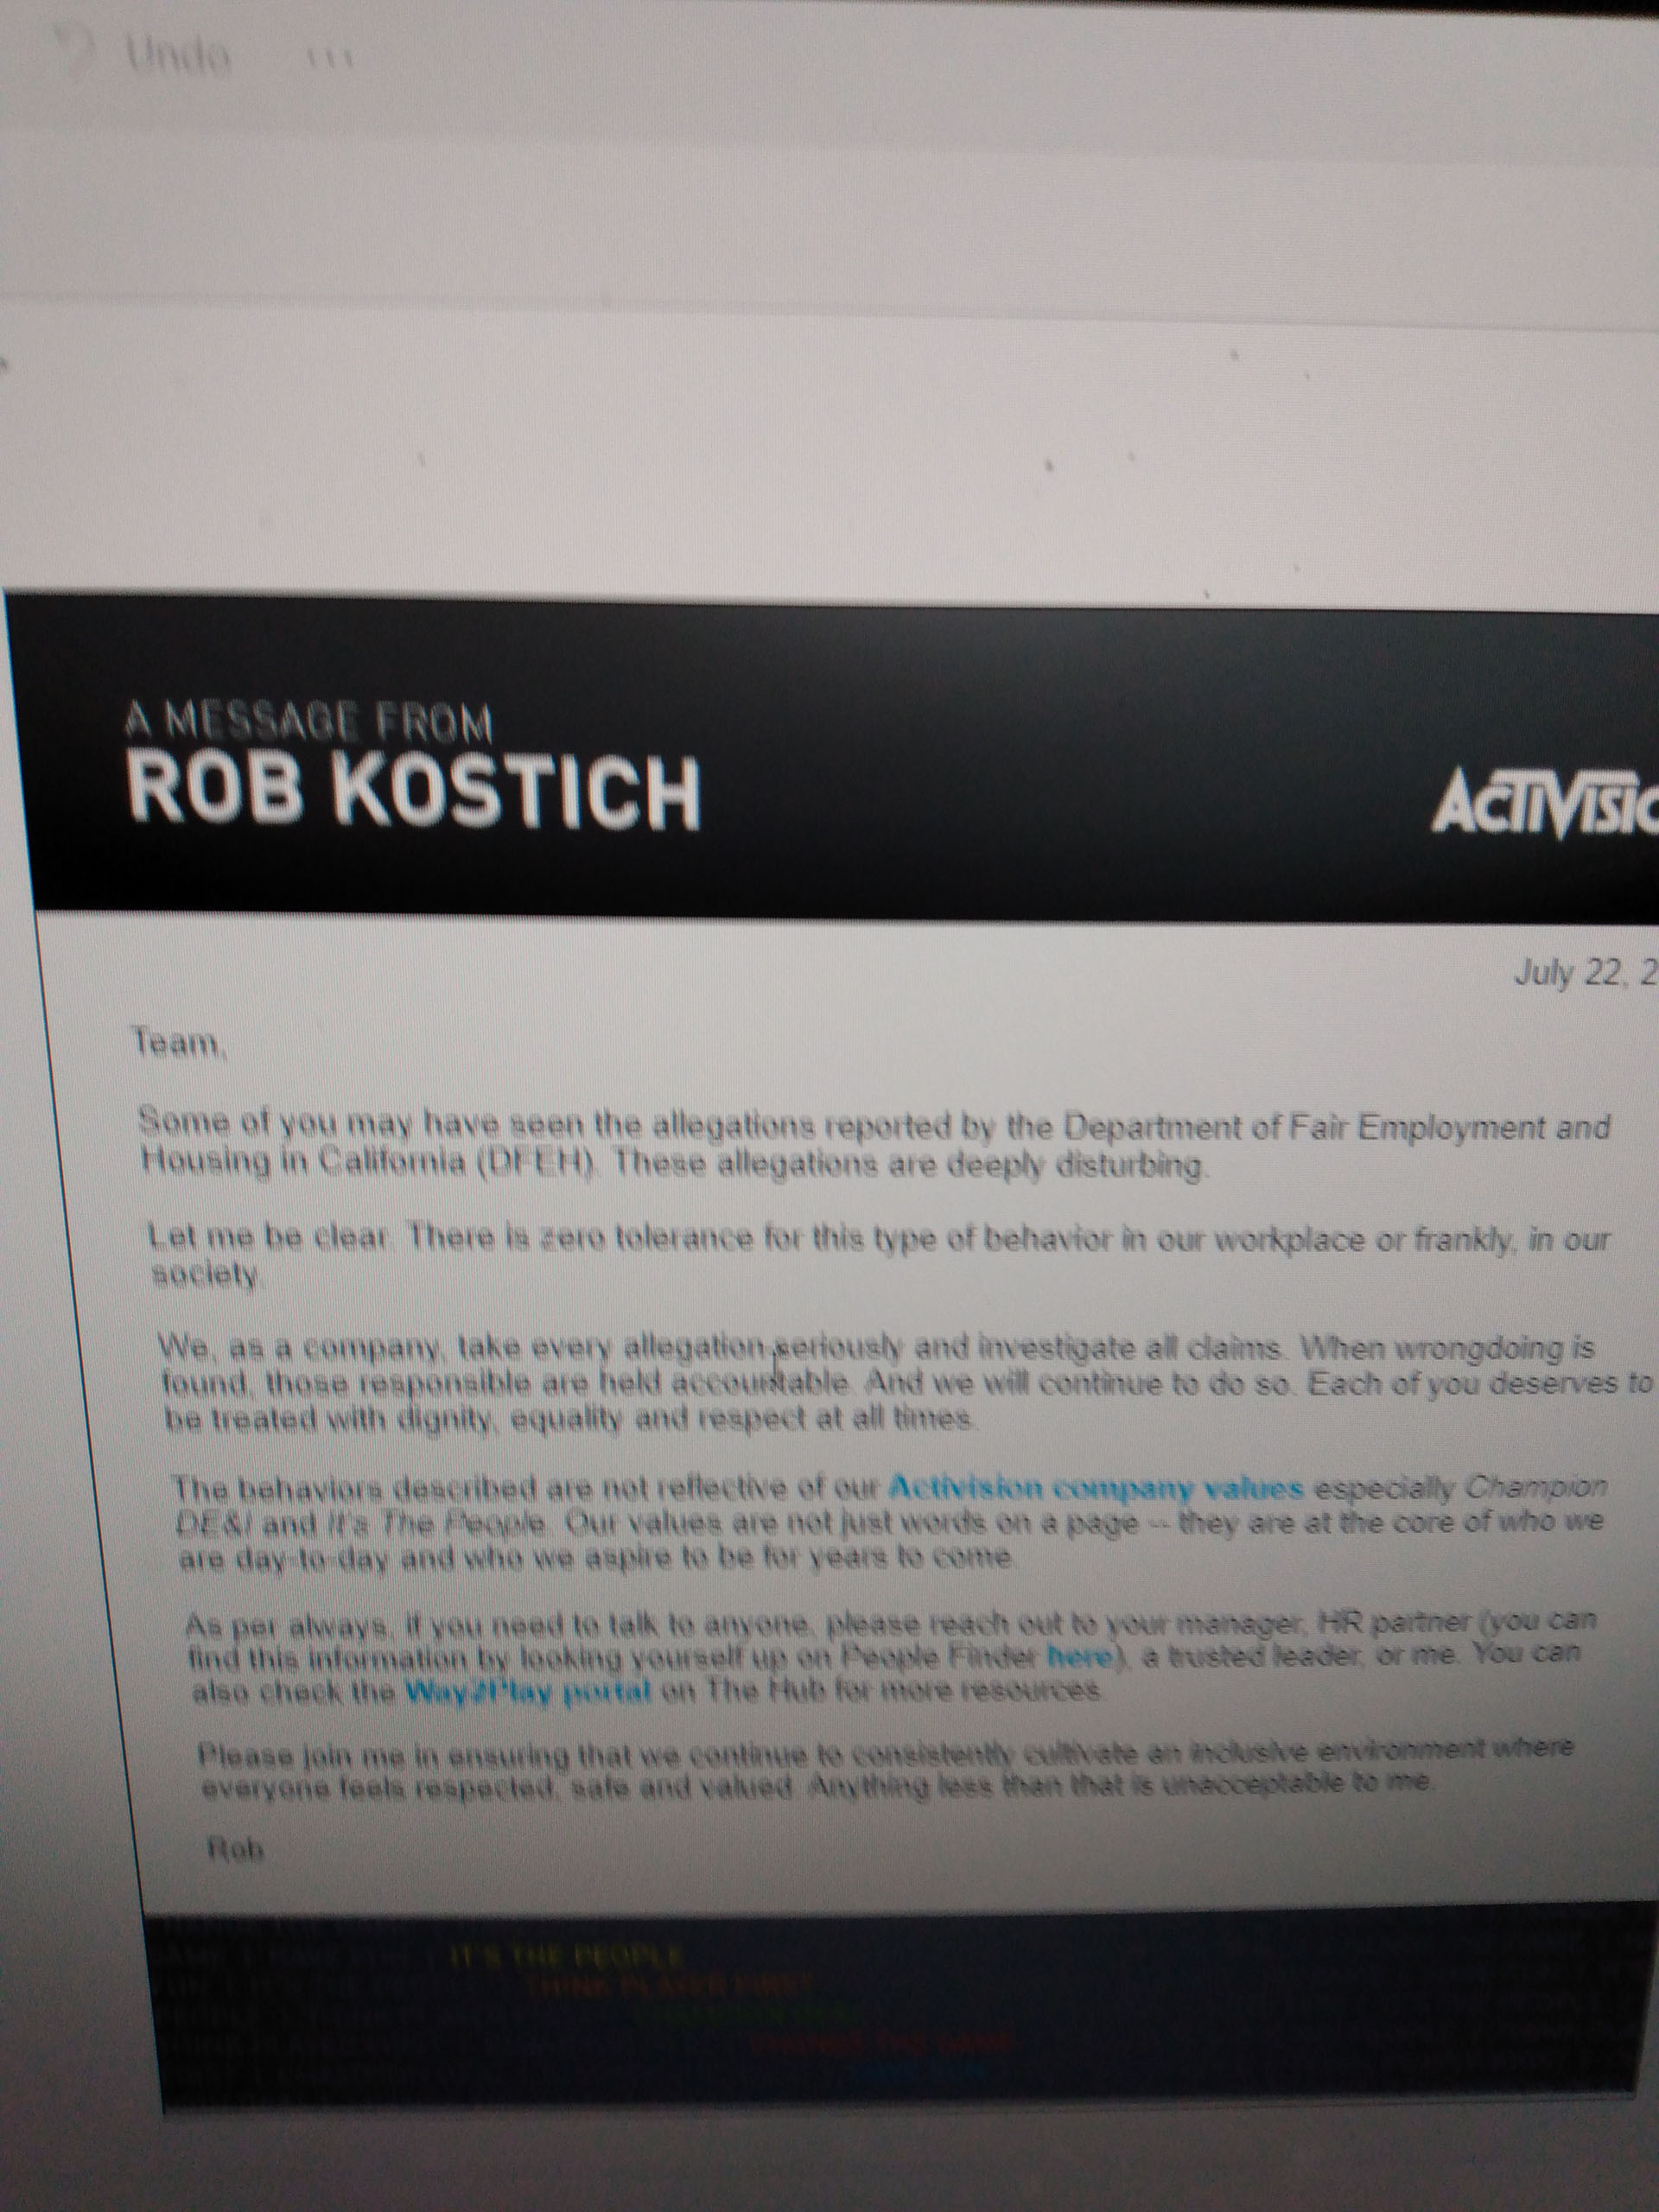 Photo of an email message from Rob Kostich